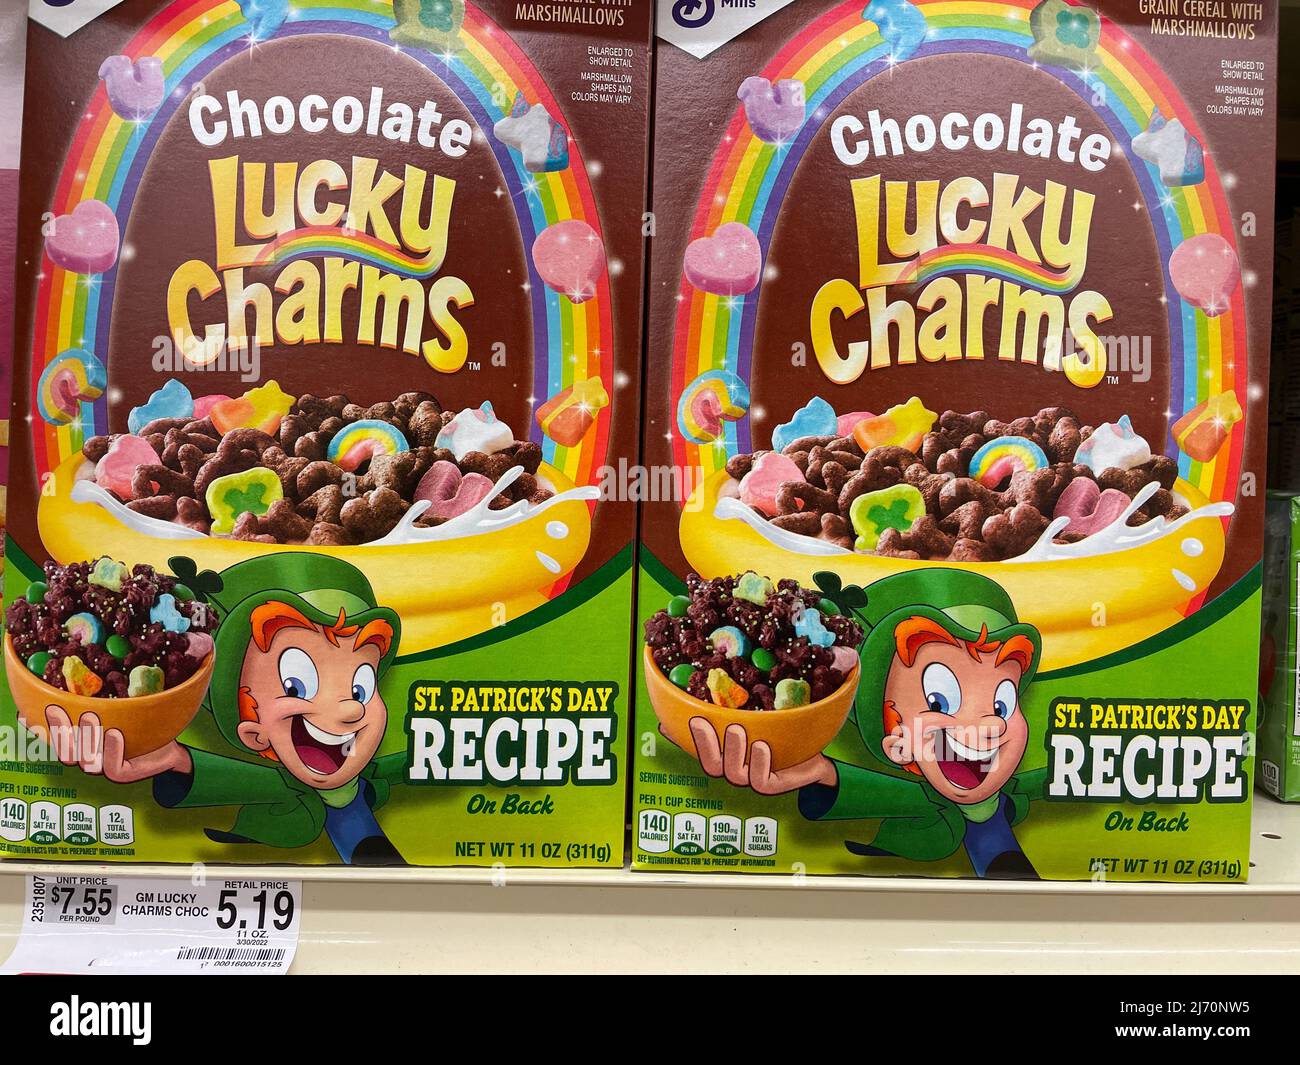 Lucky Charms Chocolate Cereal, 11 Ounce Box -- 12 per case